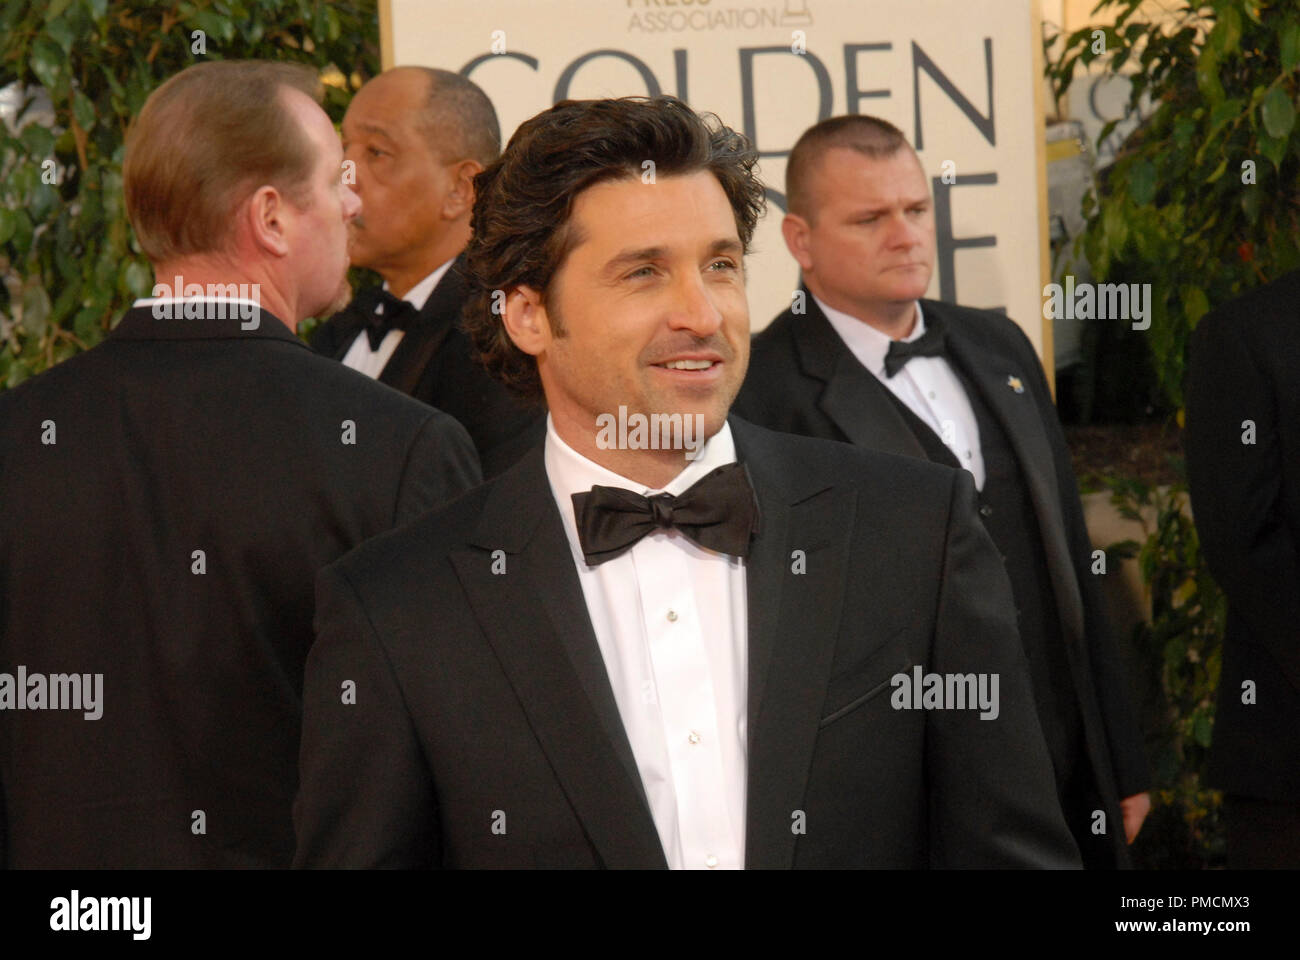 Hollywood Foreign Press Association presents the 2007 'Golden Globe Awards - 64th Annual' (Arrivals) Patrick Dempsey 1-15-07 Stock Photo